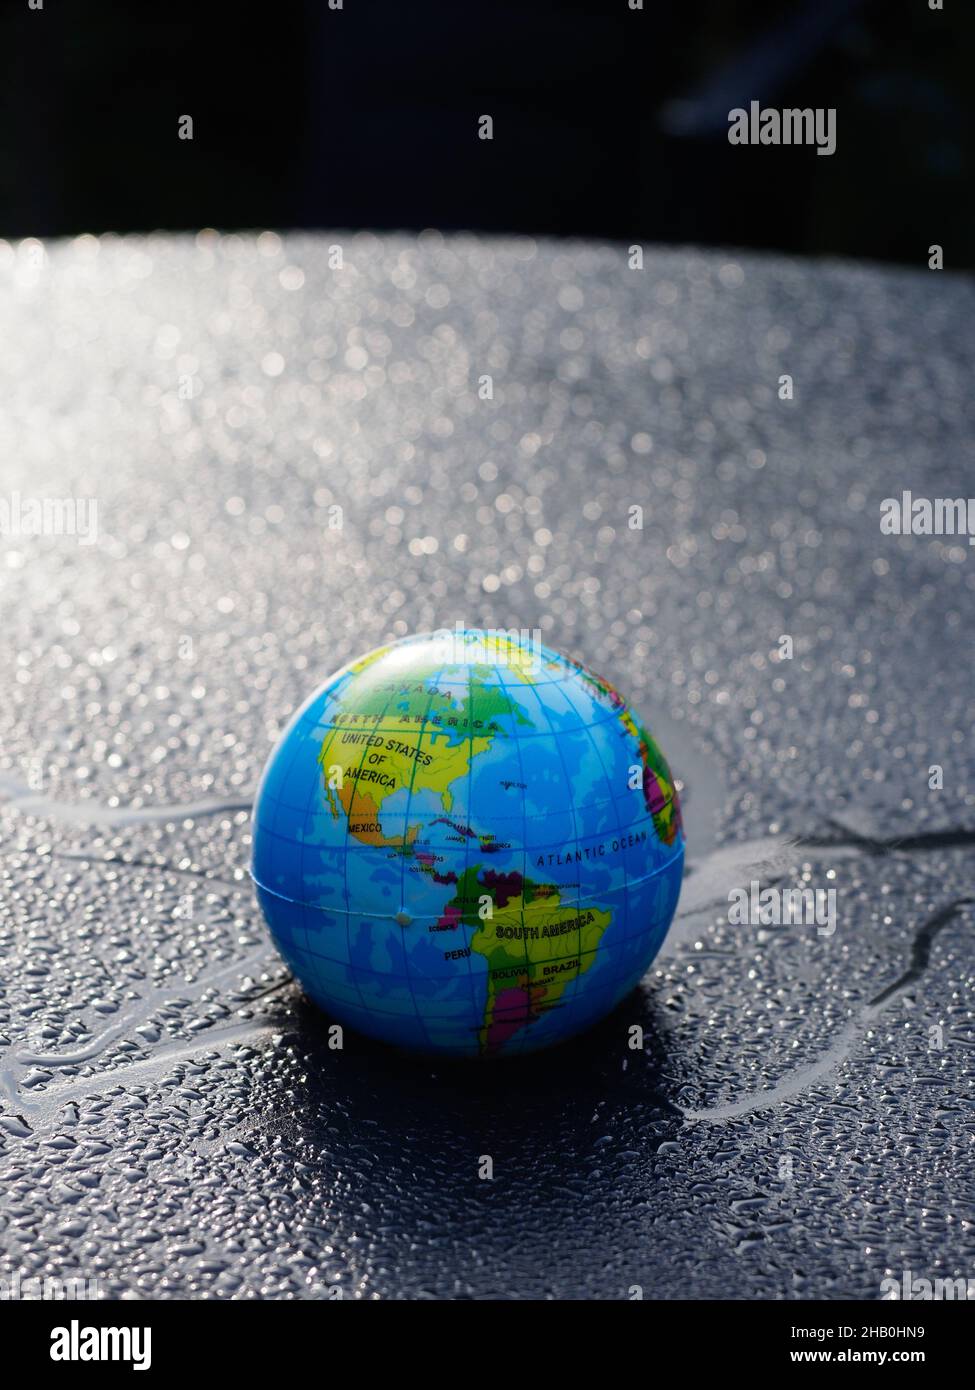 A model globe of the planet Earth against a background of water drops with a blue tint Stock Photo